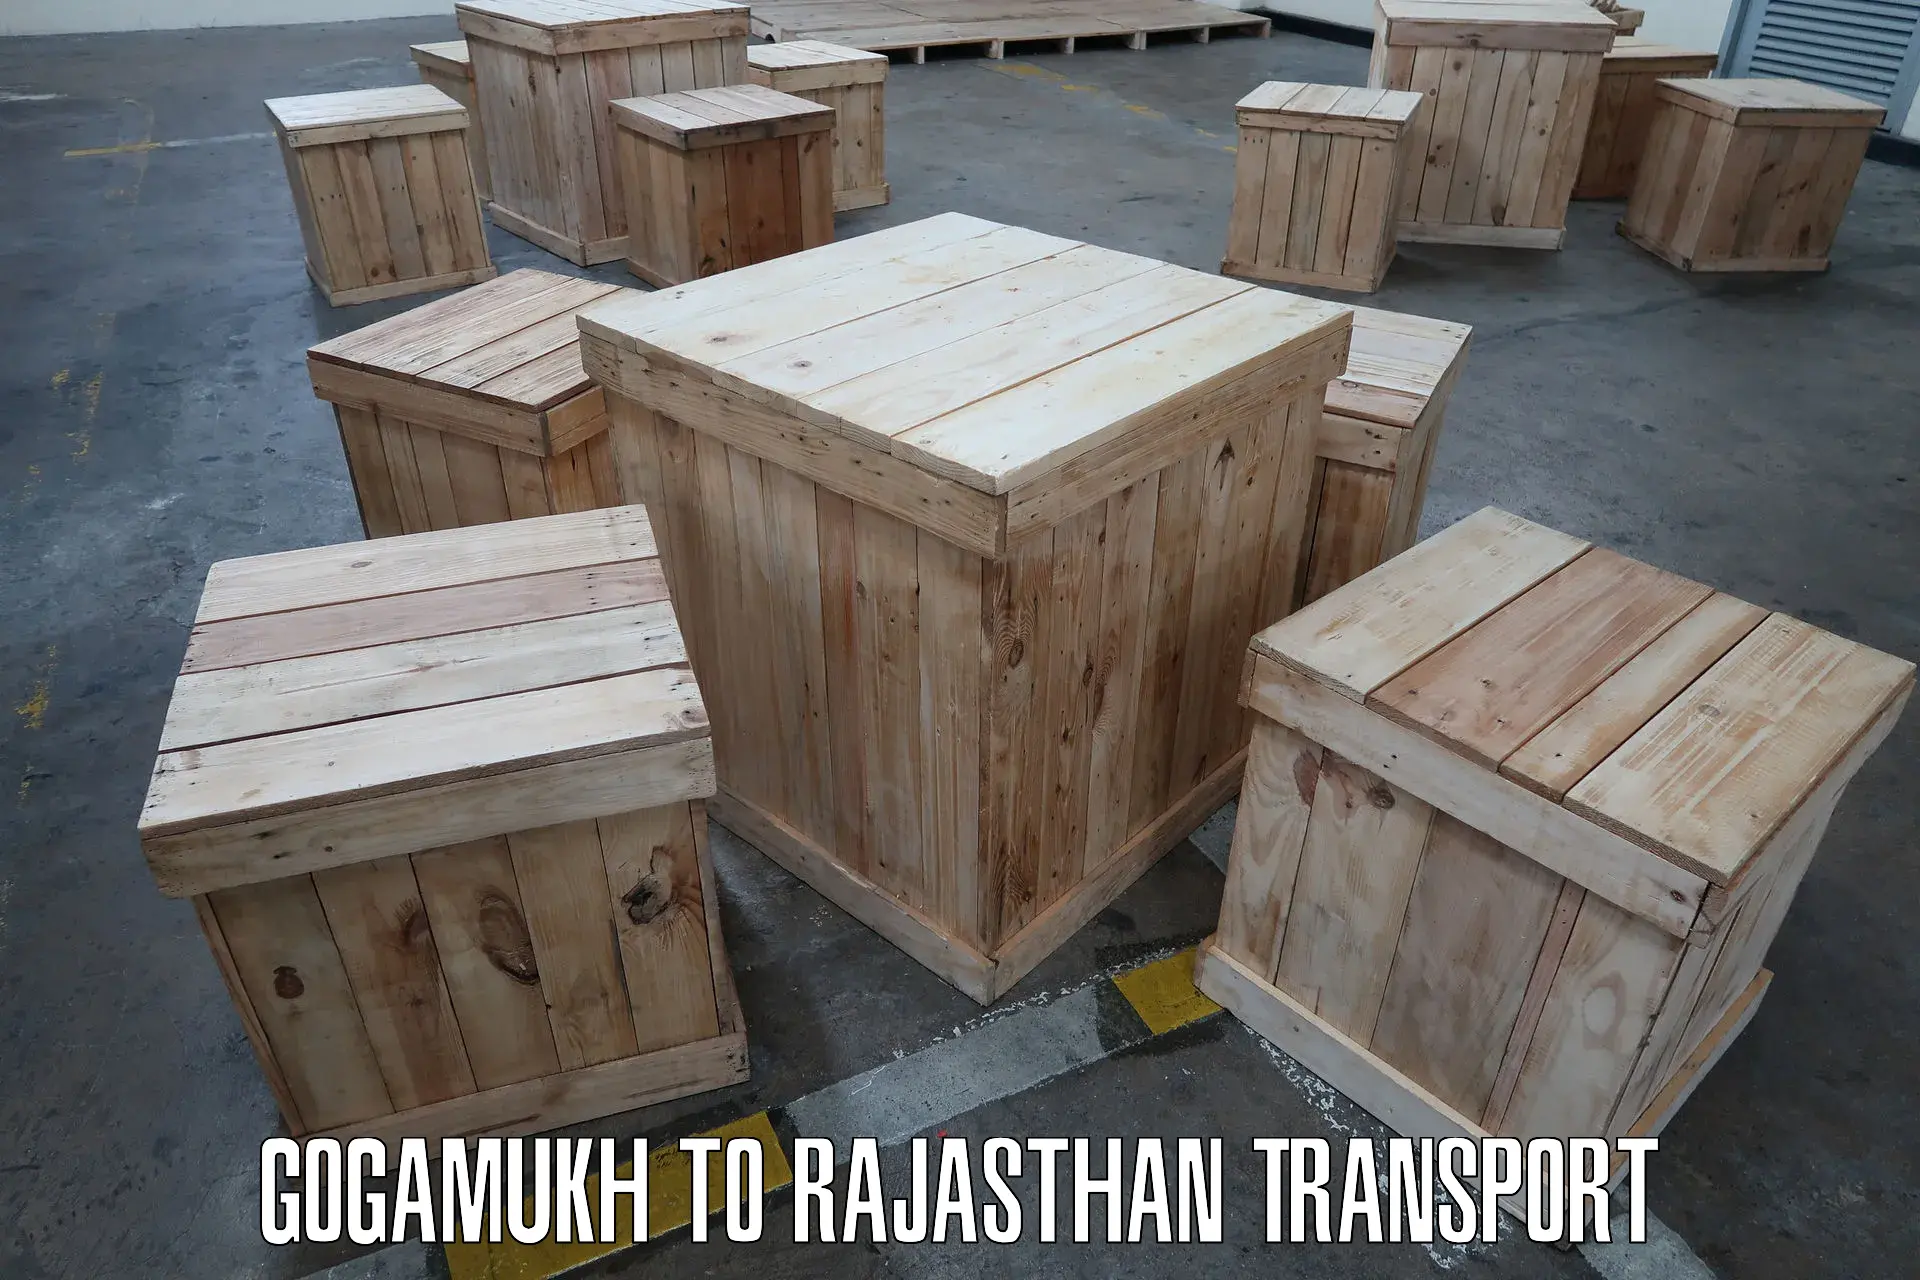 Truck transport companies in India in Gogamukh to Deeg